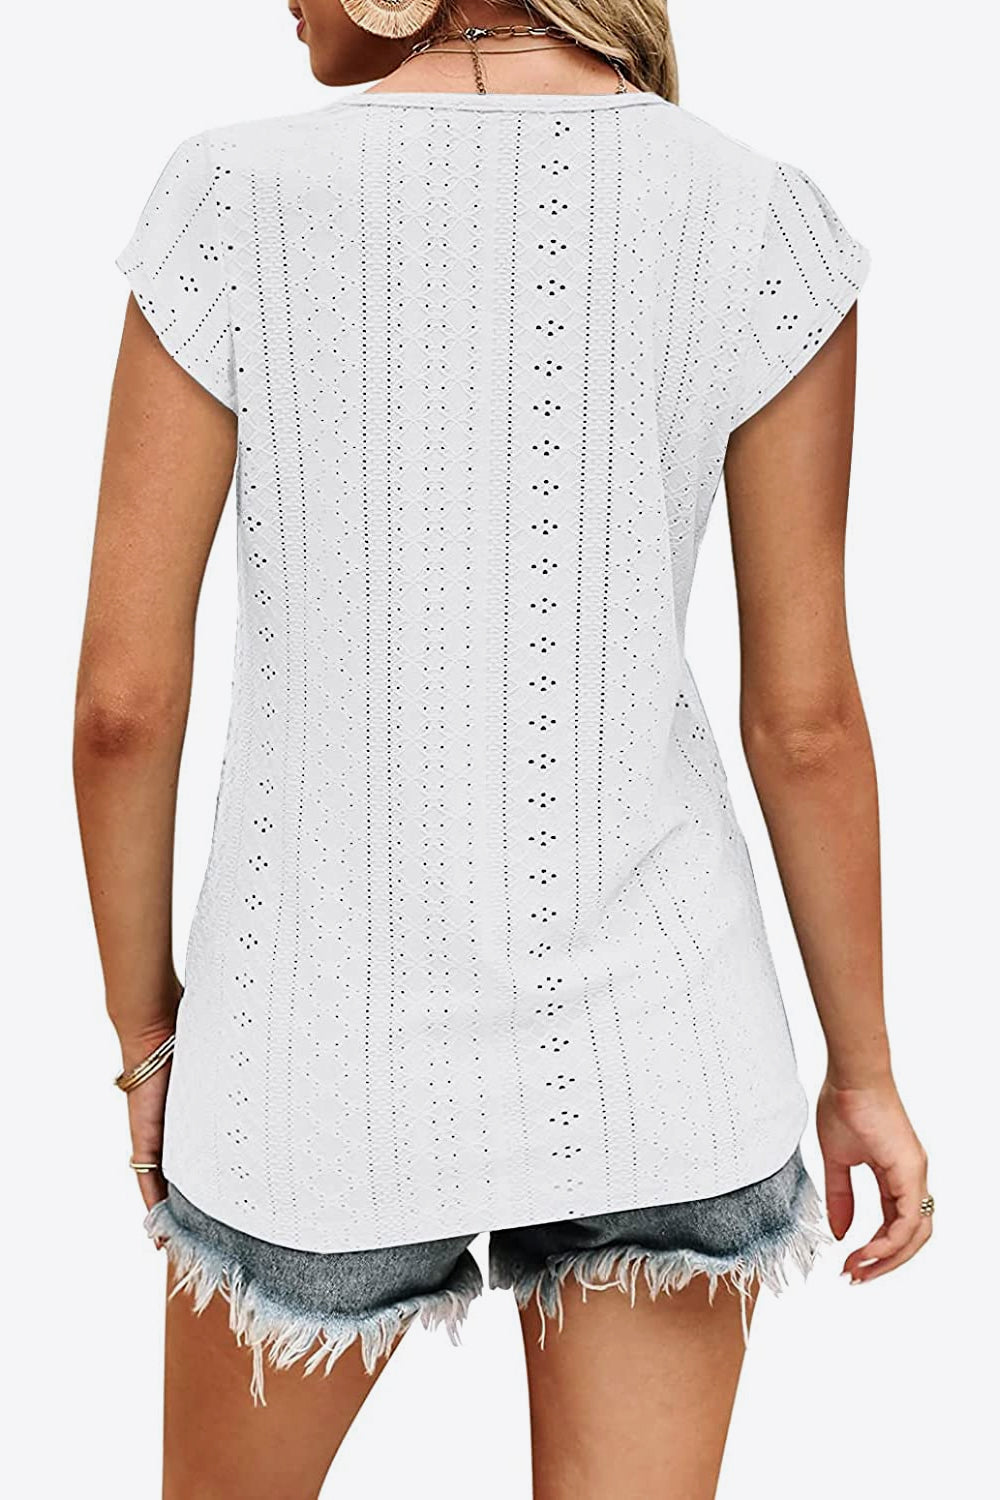 Back View, Eyelet Contrast V-Neck Tee In White